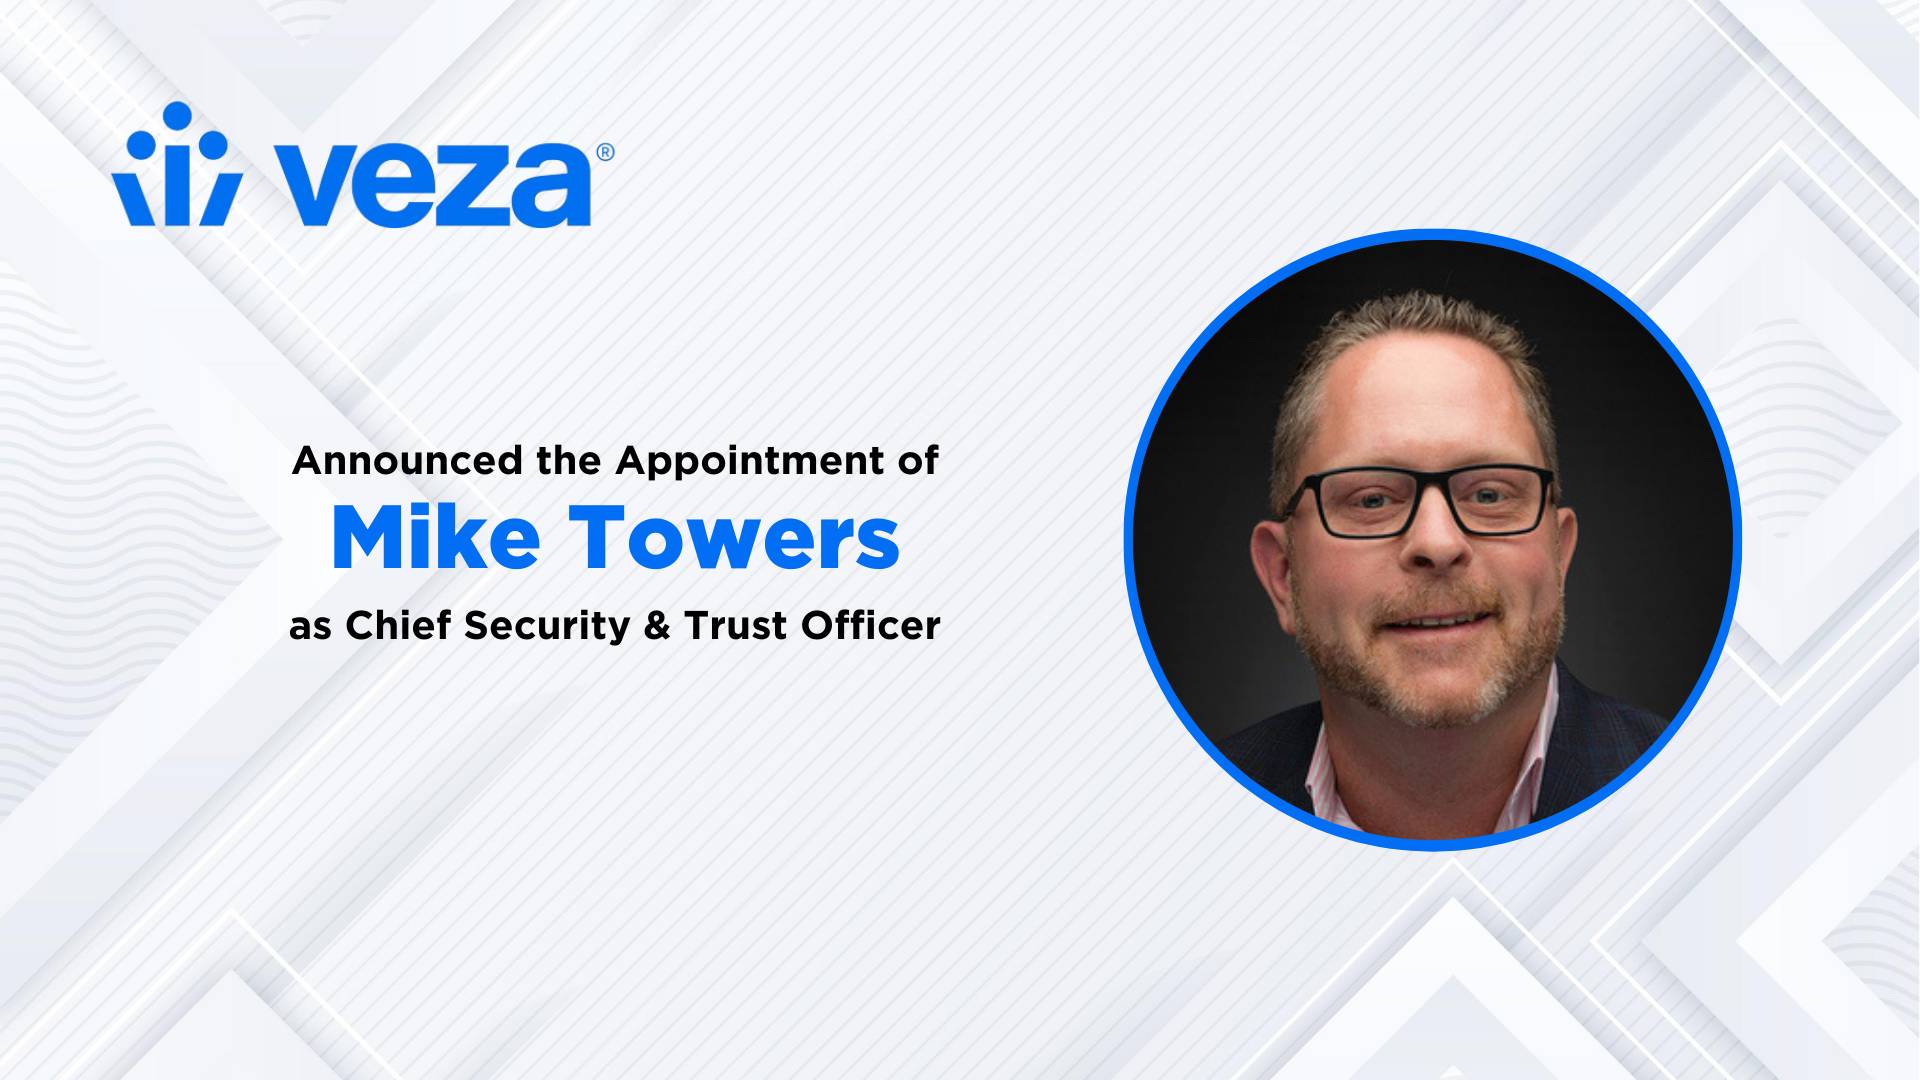 Veza Appoints Mike Towers as Chief Security & Trust Officer